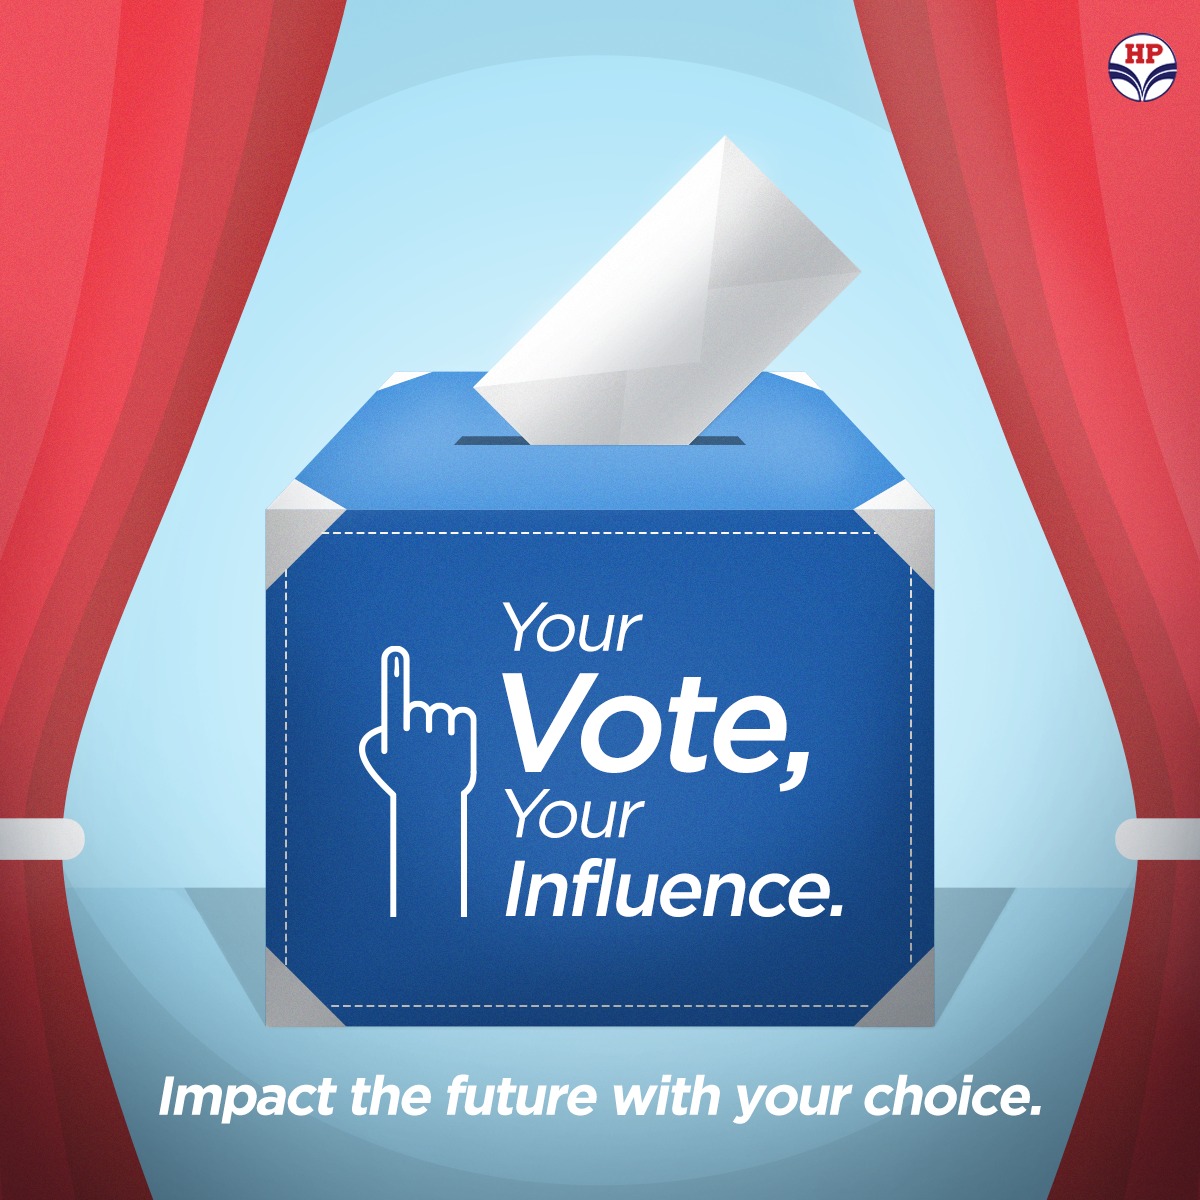 Today heralds the start of democracy in action. Your vote is your voice, your influence. Let's shape the future together with our choices at the ballot box. #HPRetail #MeraHPPump @hpcl #voteforfuture